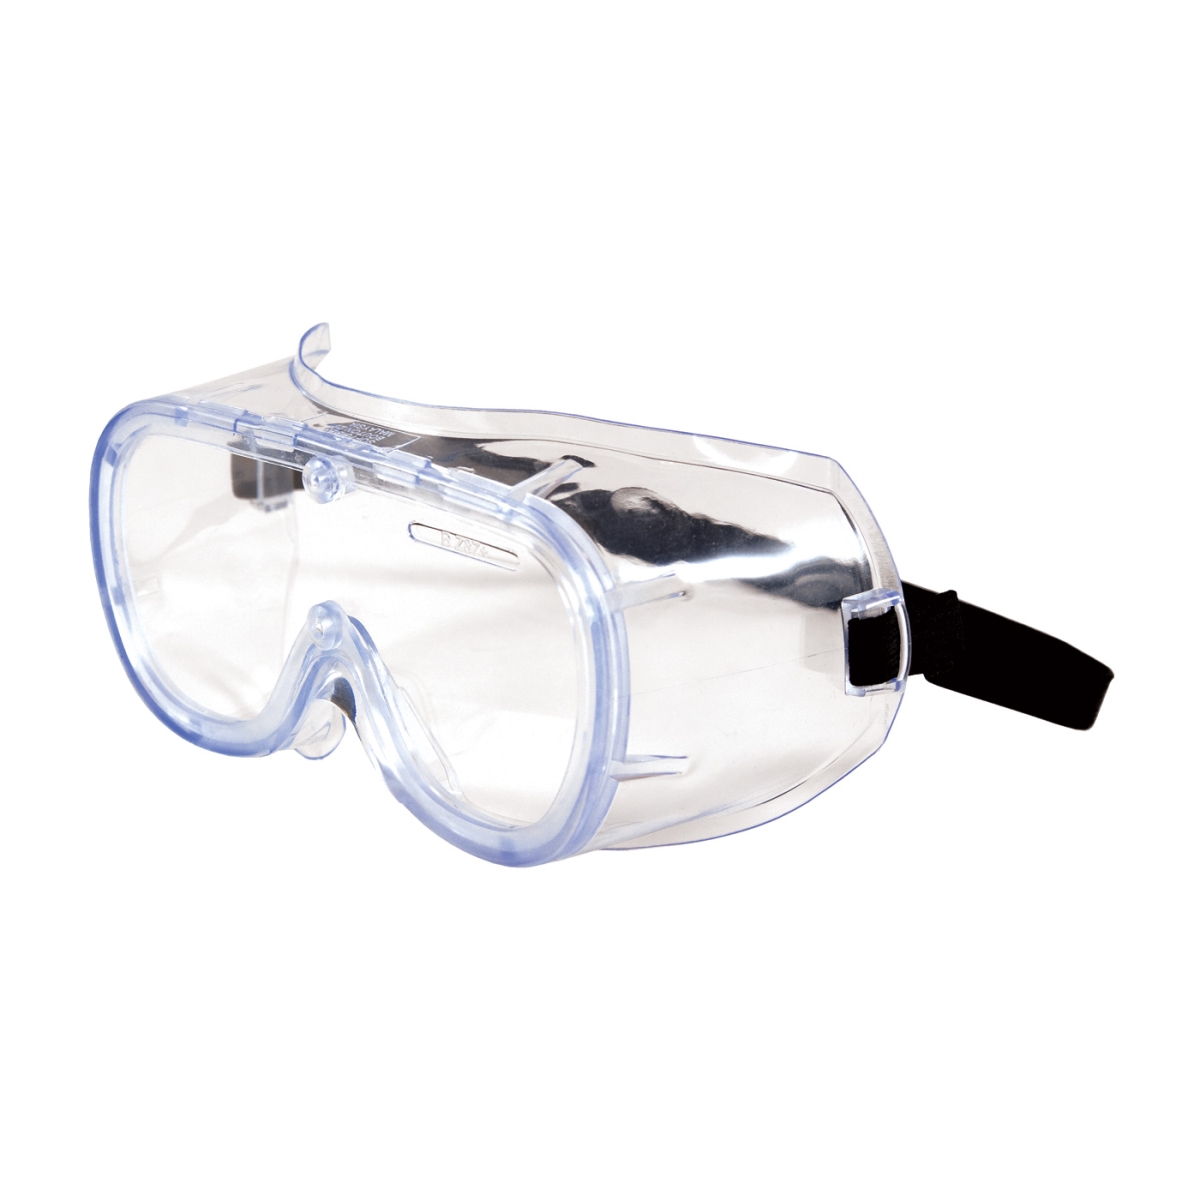 112-248-5290-300b Non-vented Softsides Goggle, Clear Lens